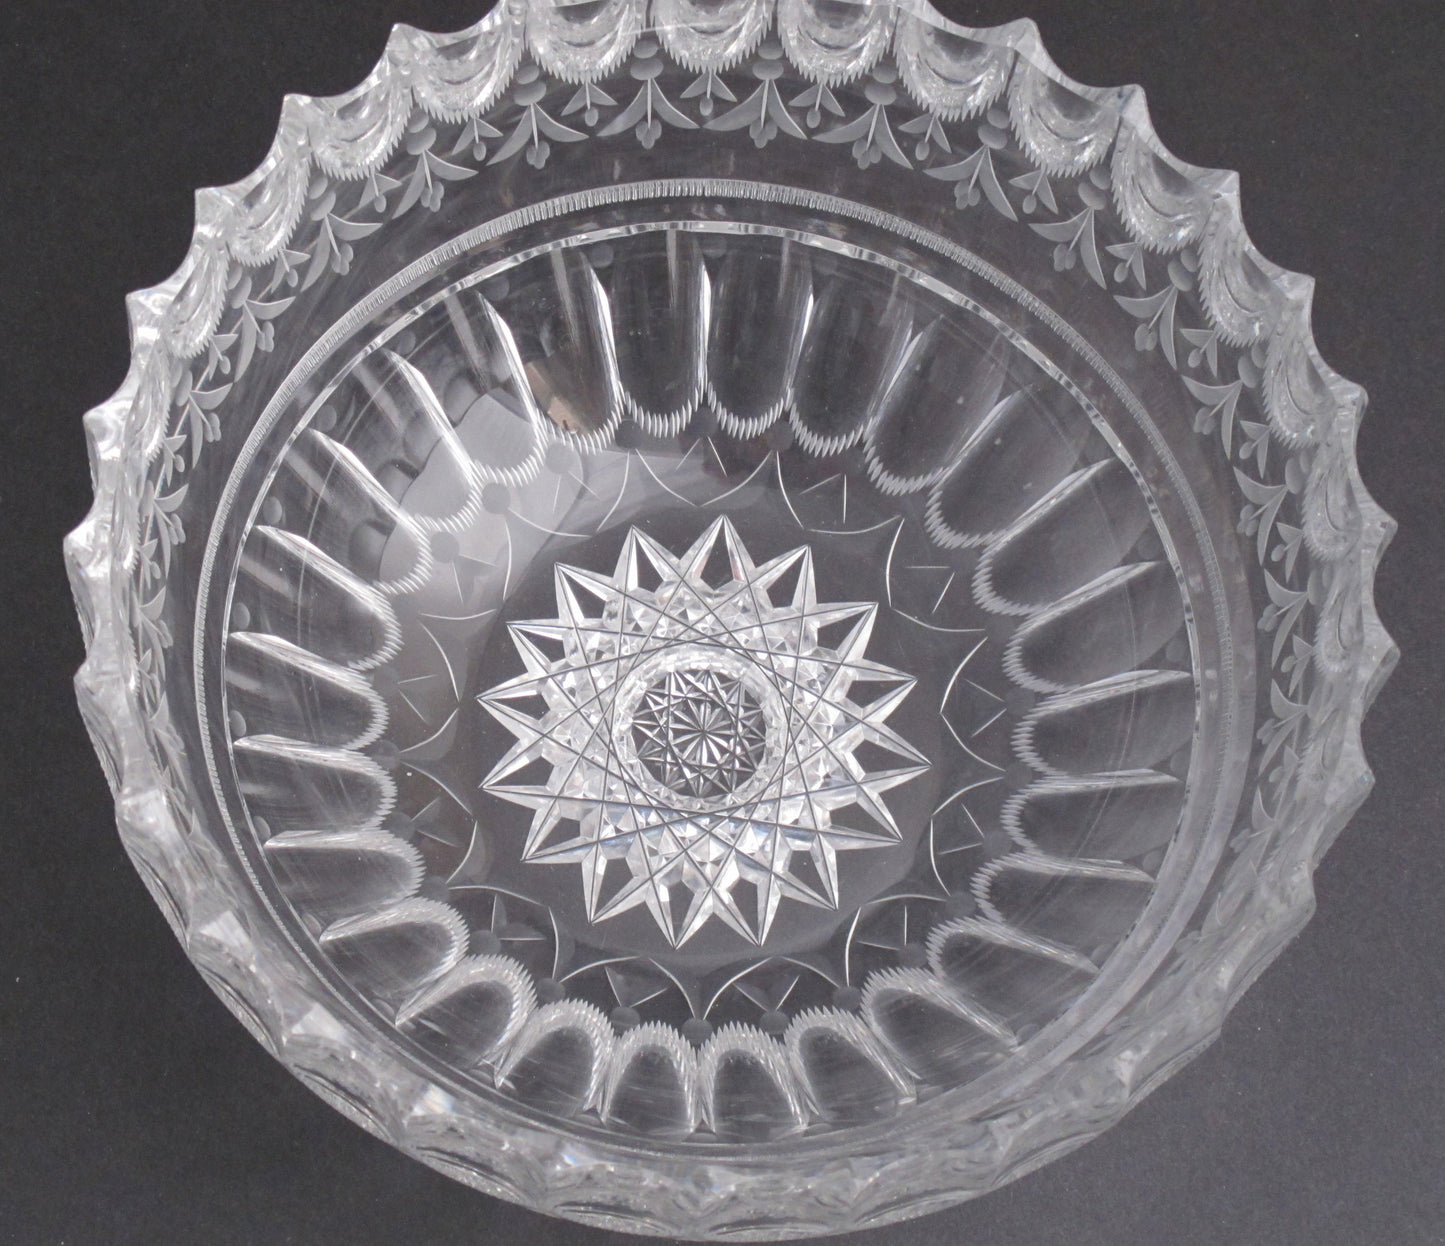 Unique American Brilliant Period Cut Glass ABP Antique 8" bowl - O'Rourke crystal awards & gifts abp cut glass